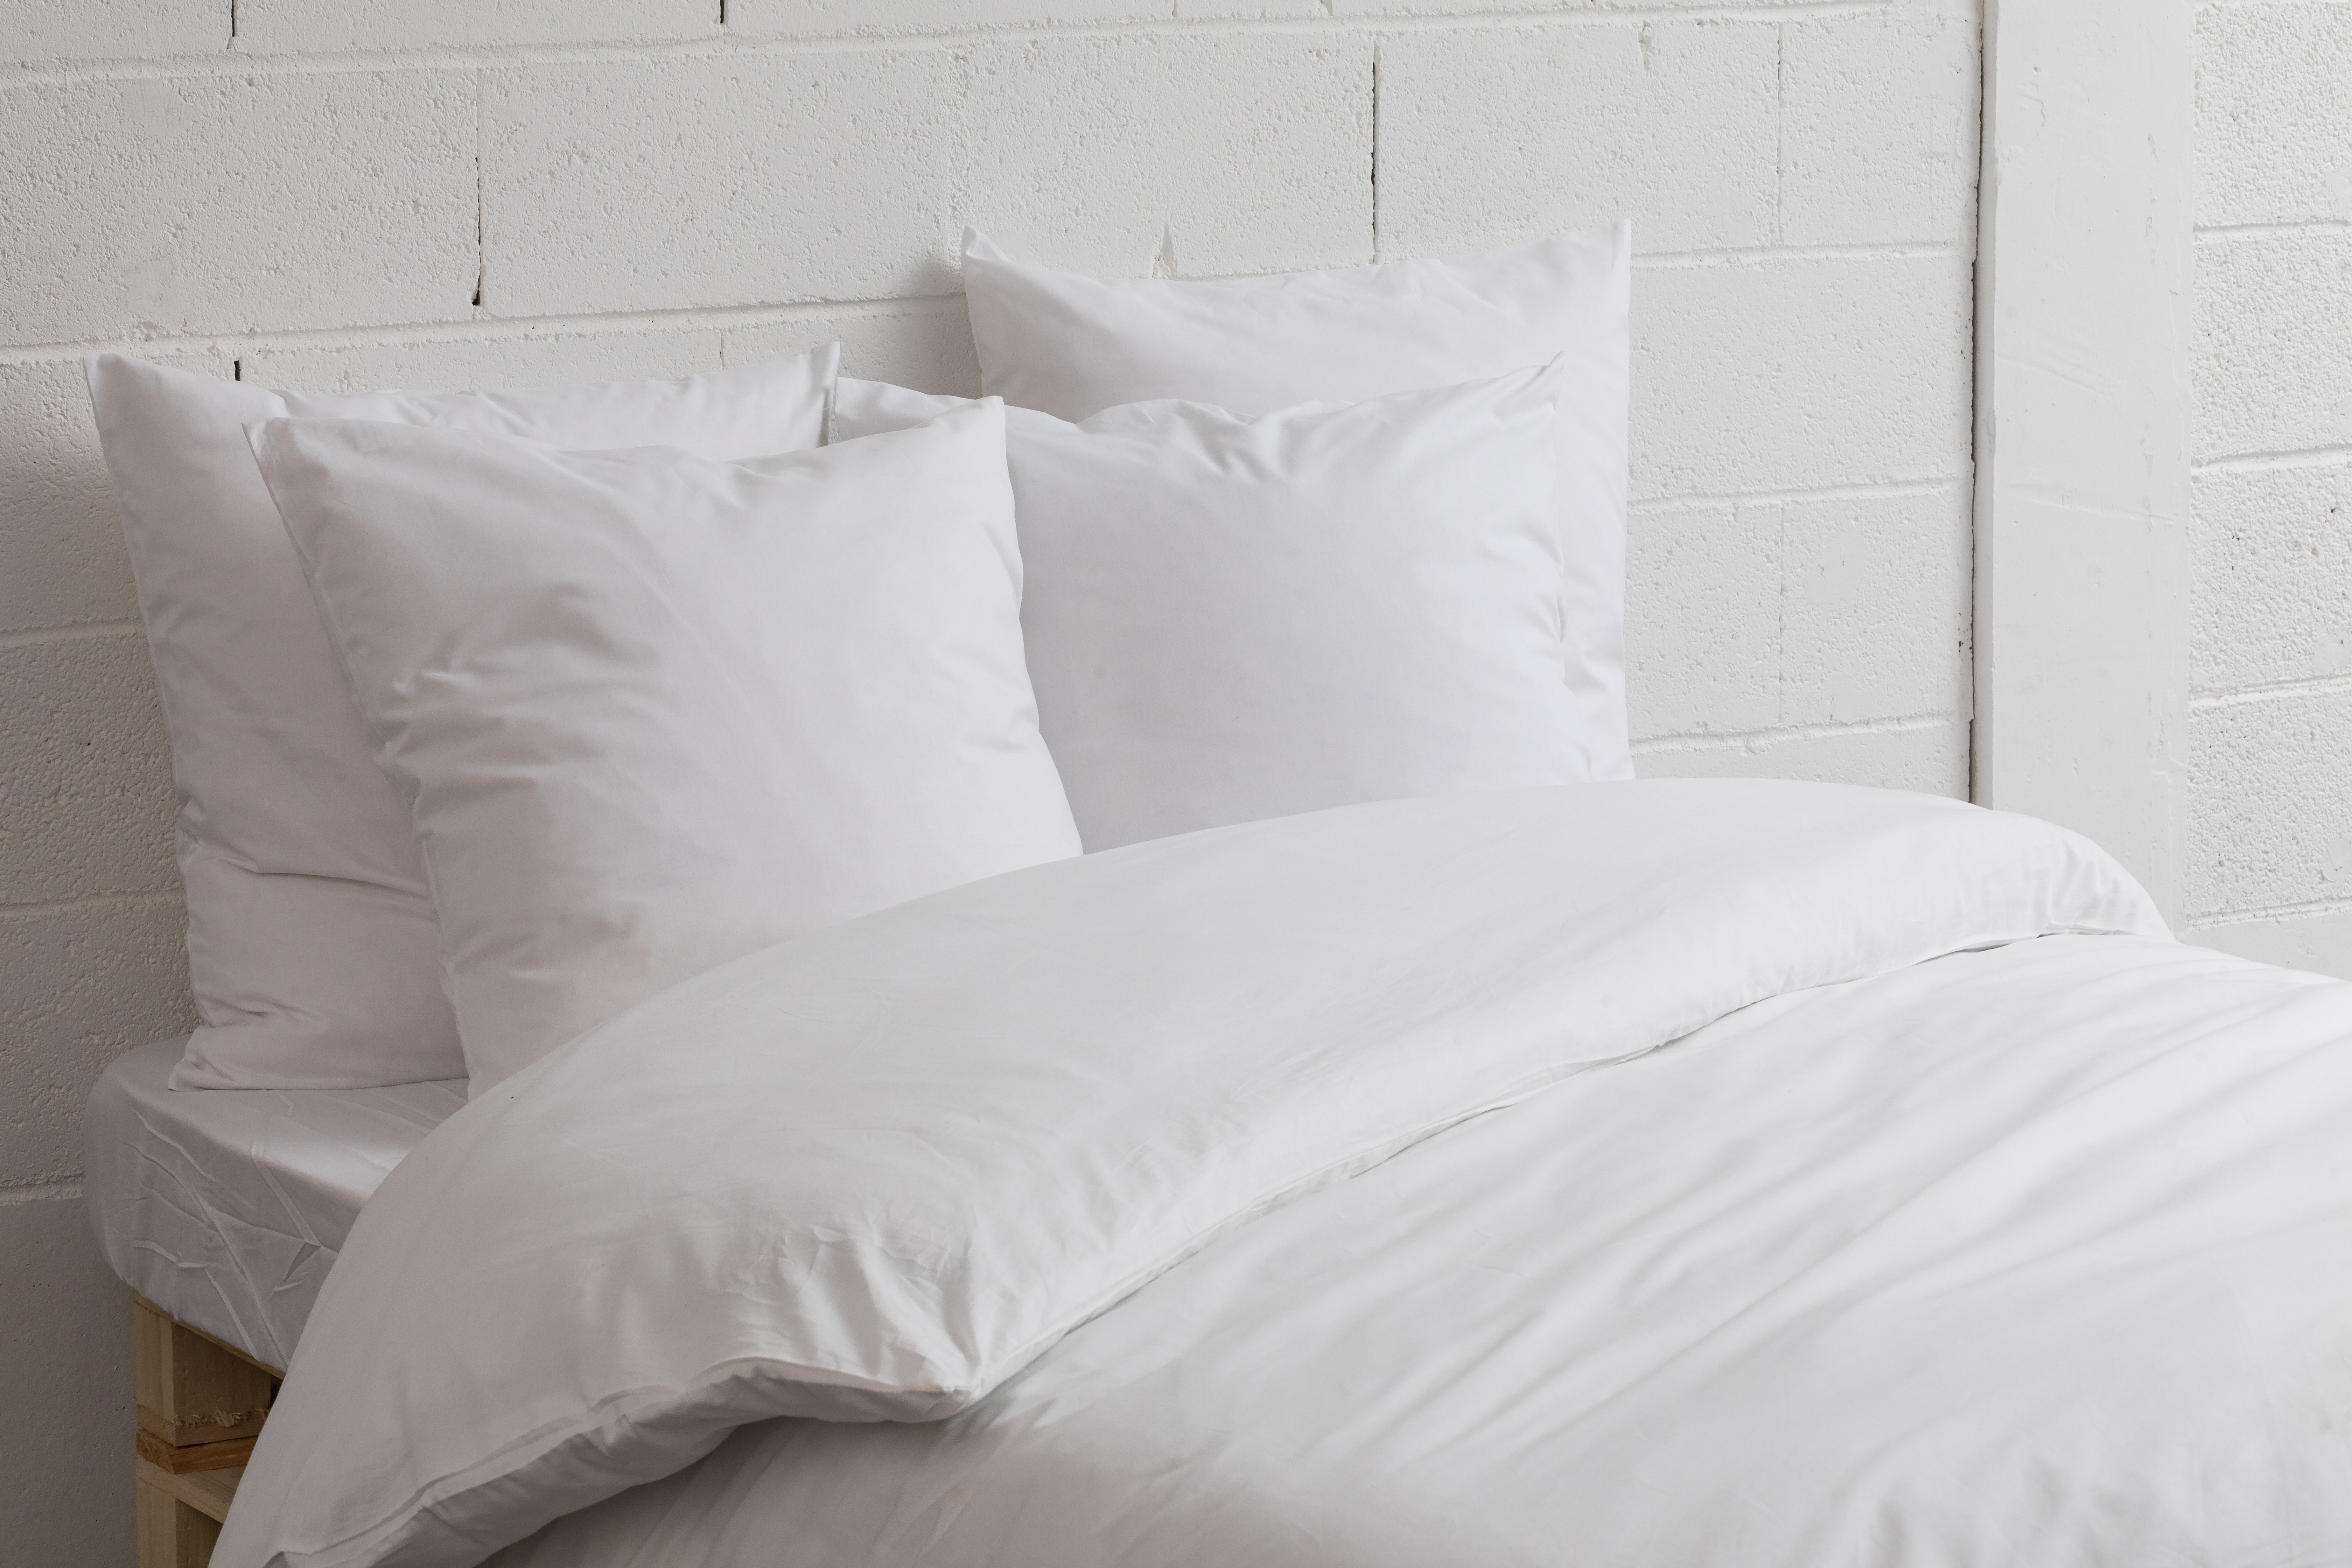 How to care for your home linen ?